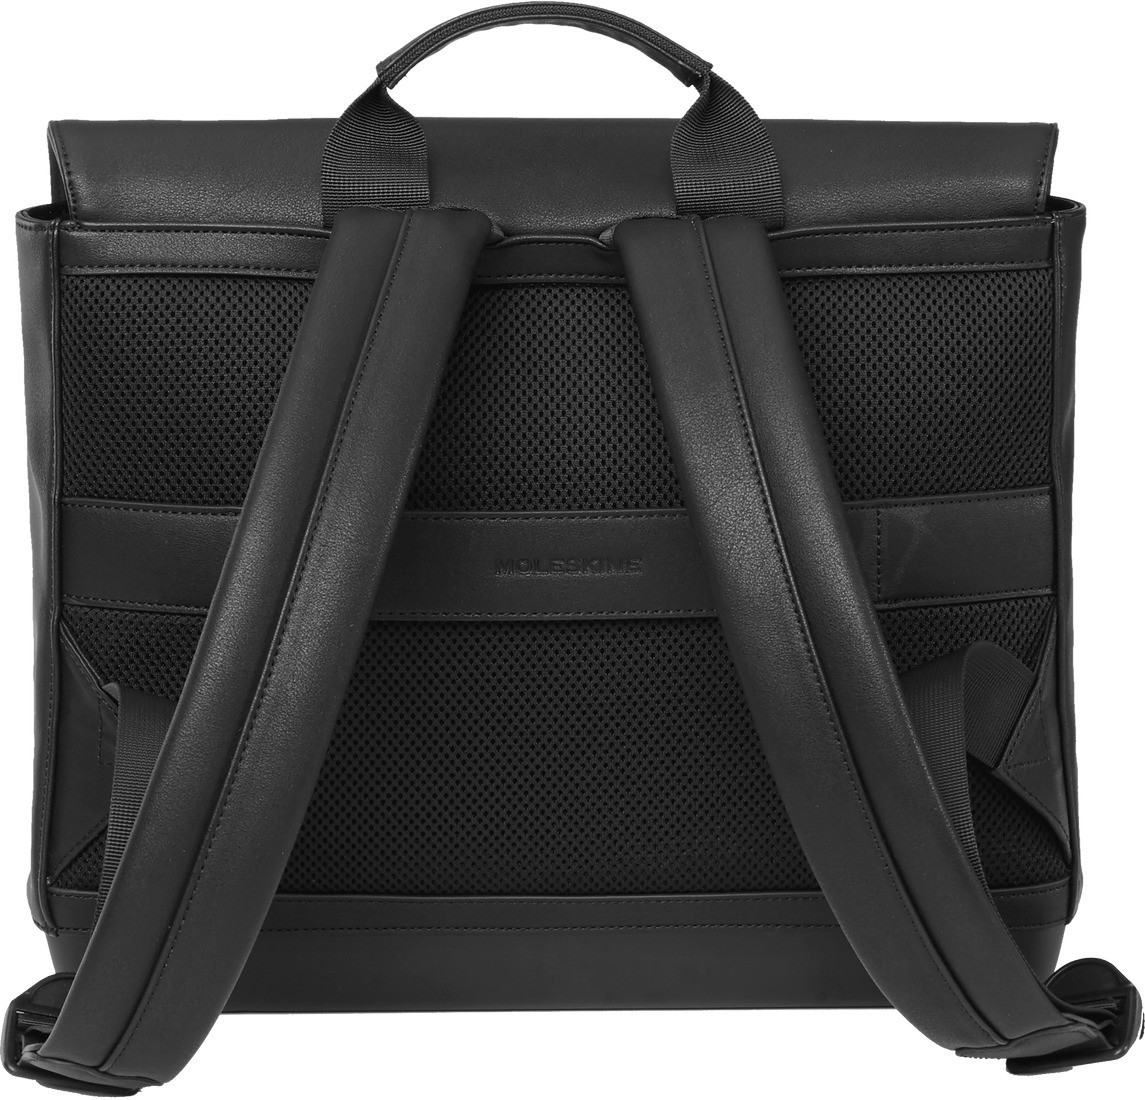 Moleskine Horizontal Backpack Classic Collection, Black